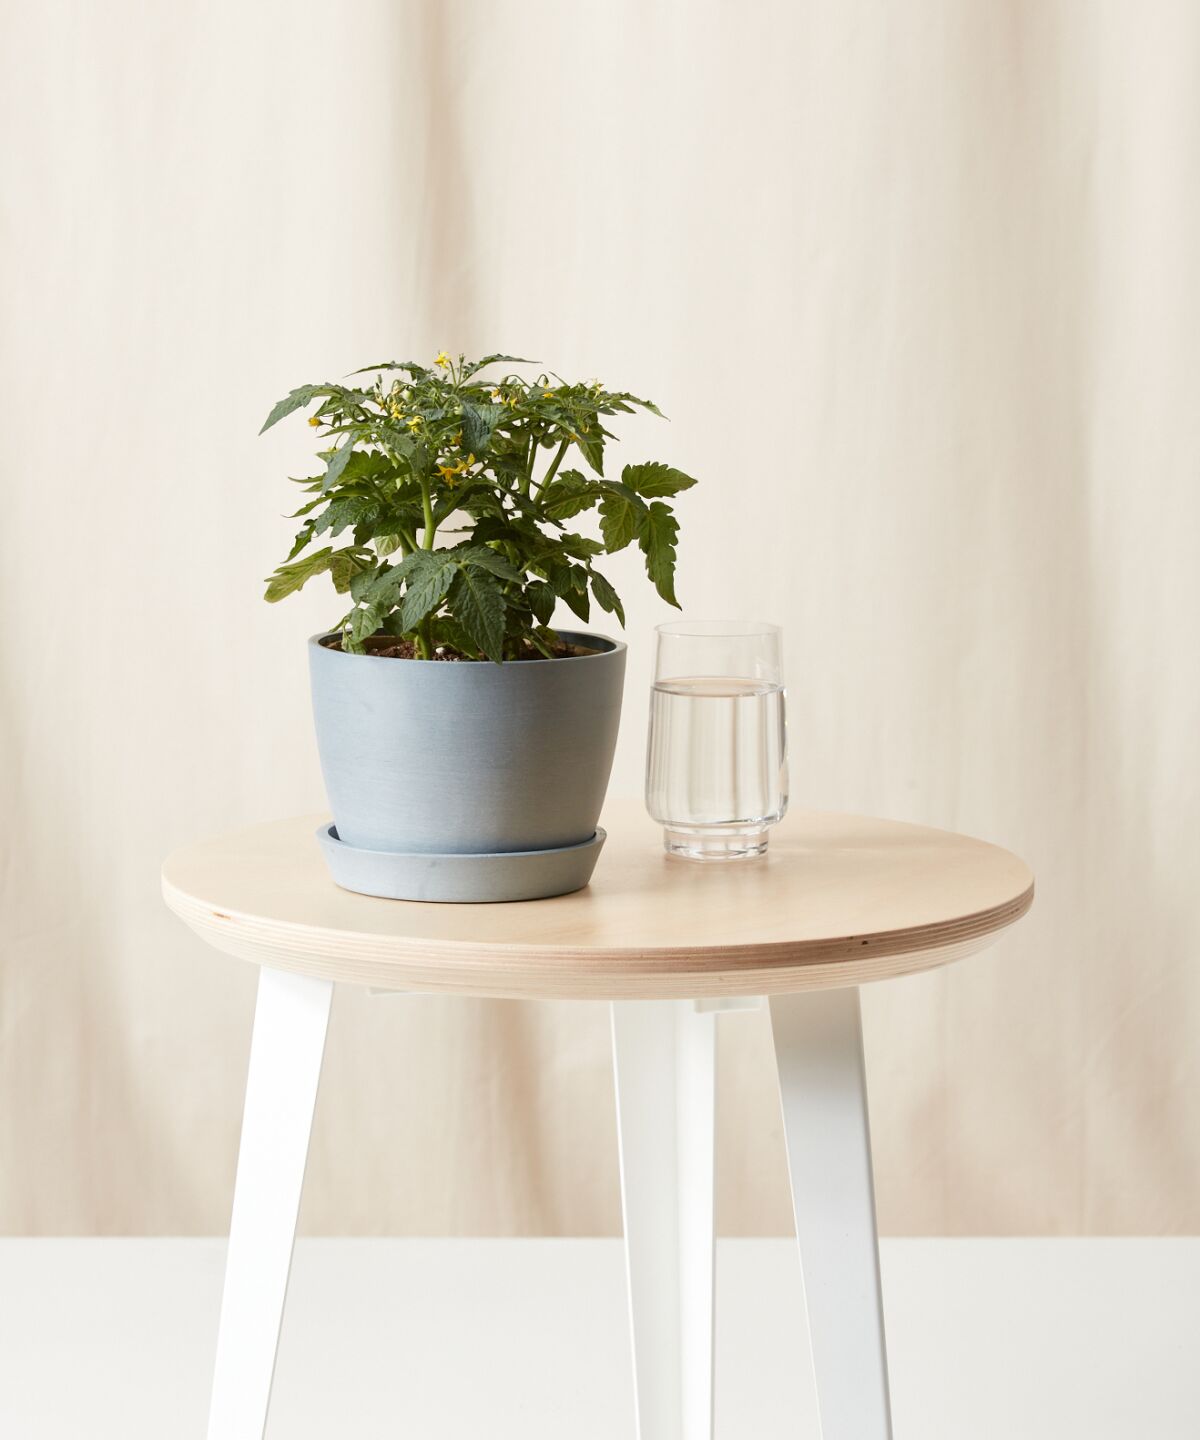 The micro tomato plant is designed to grow indoors.